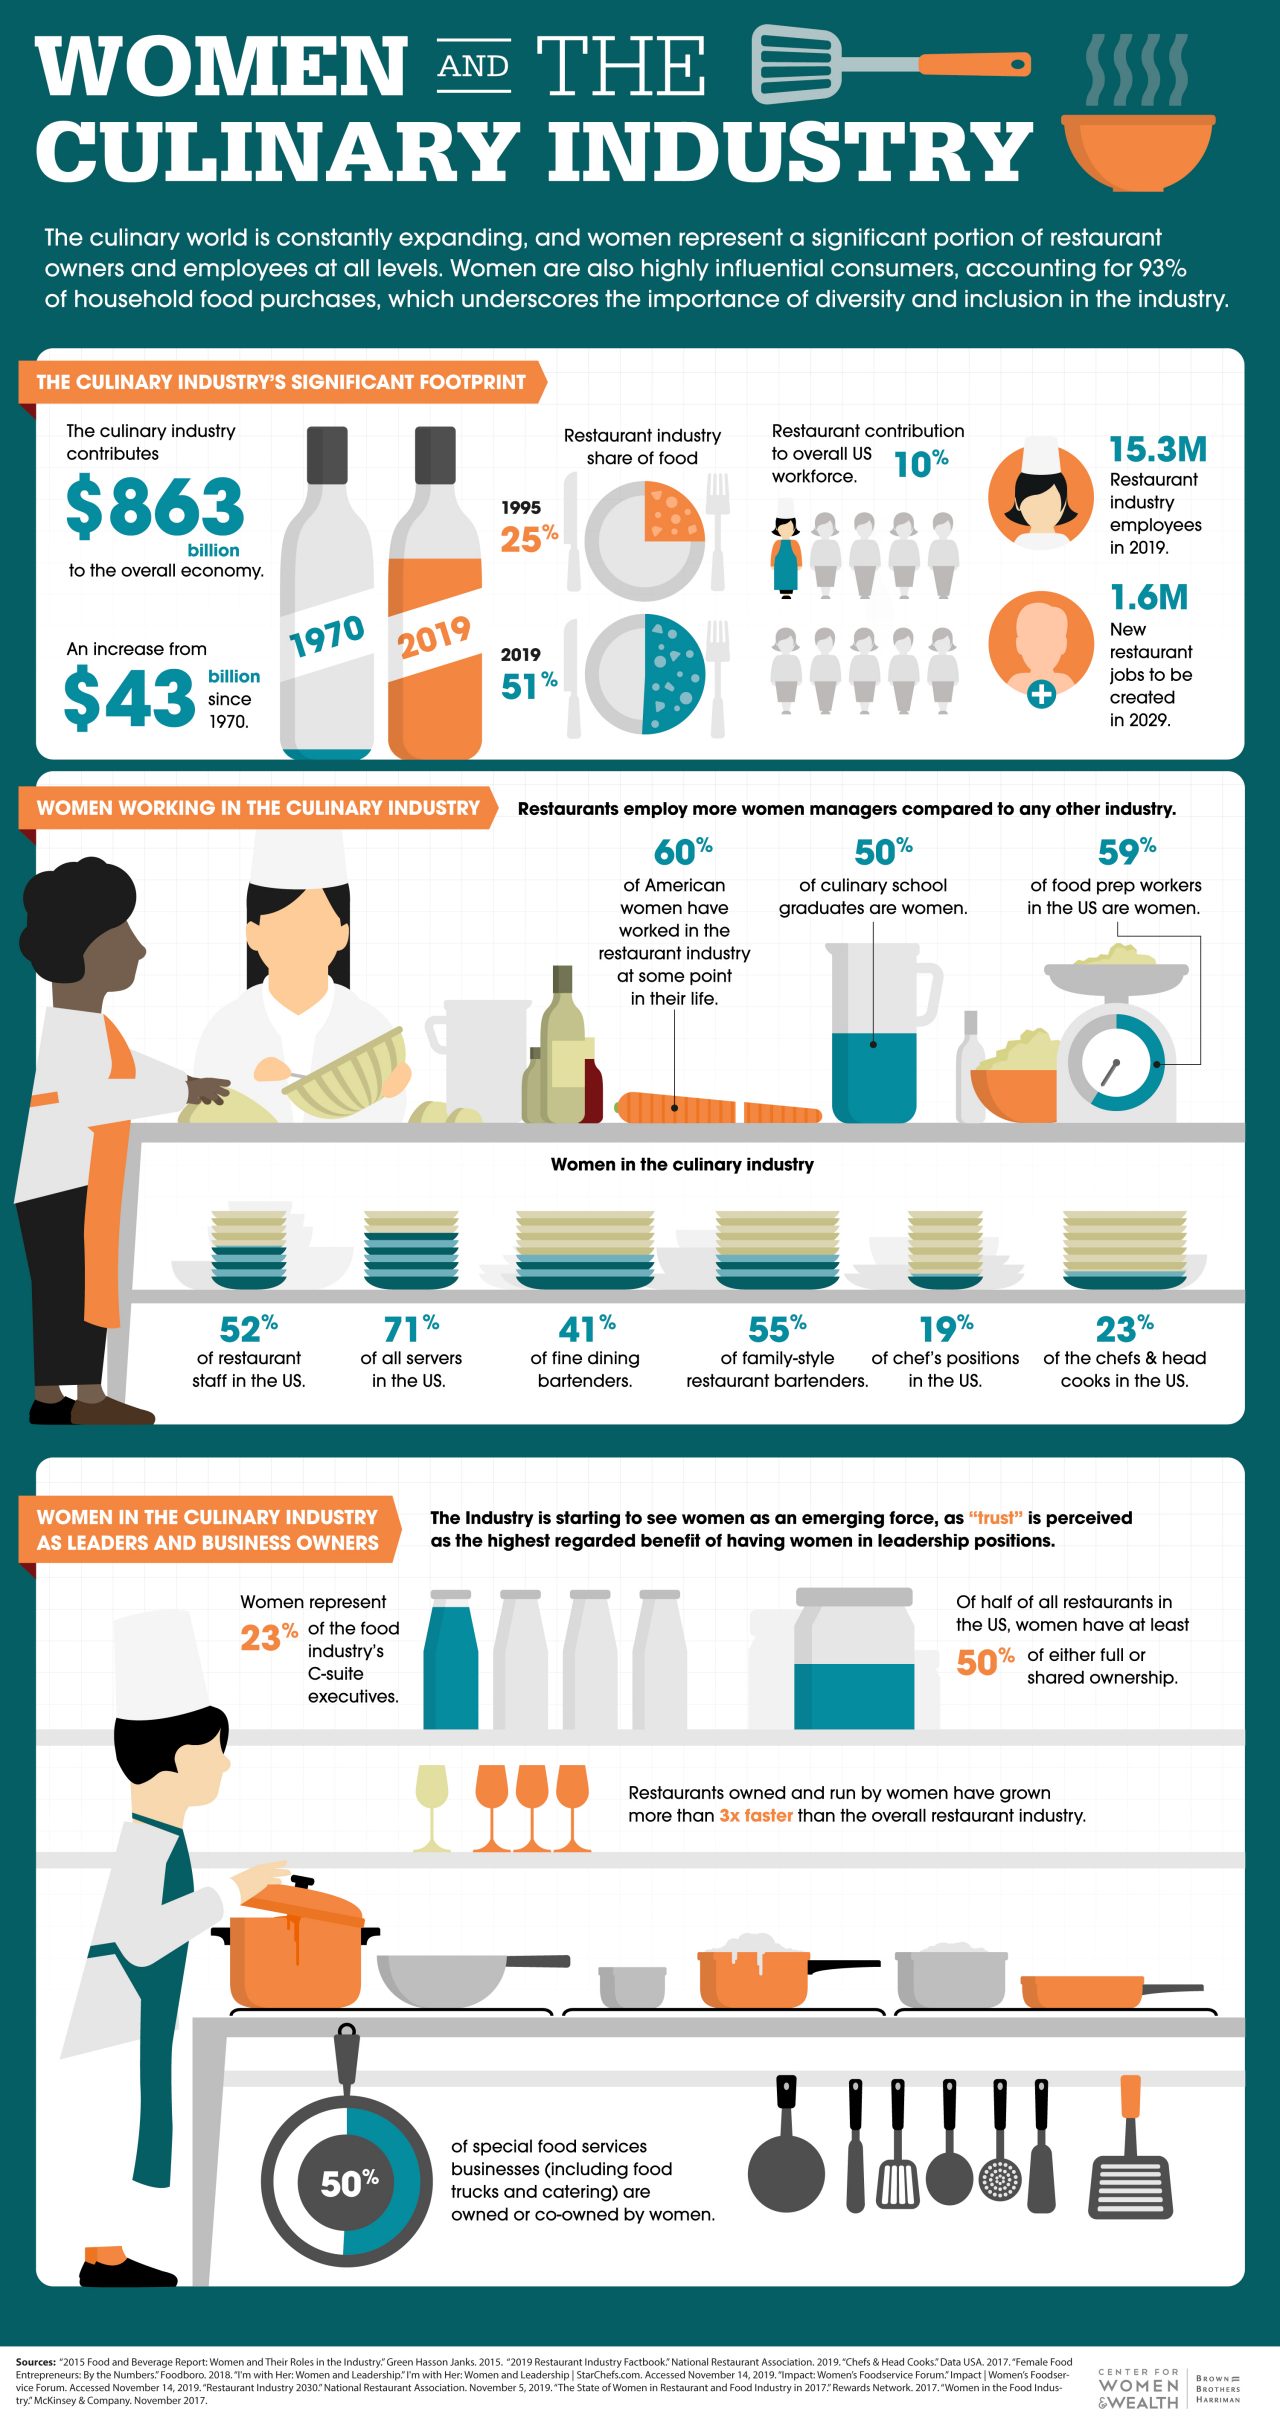 The culinary world is constantly expanding, and women represent a significant portion of restaurant owners and employees at all levels. Women are also highly influential consumers, accounting for 93% of household food purchases, which underscores the importance of diversity and inclusion in the industry.